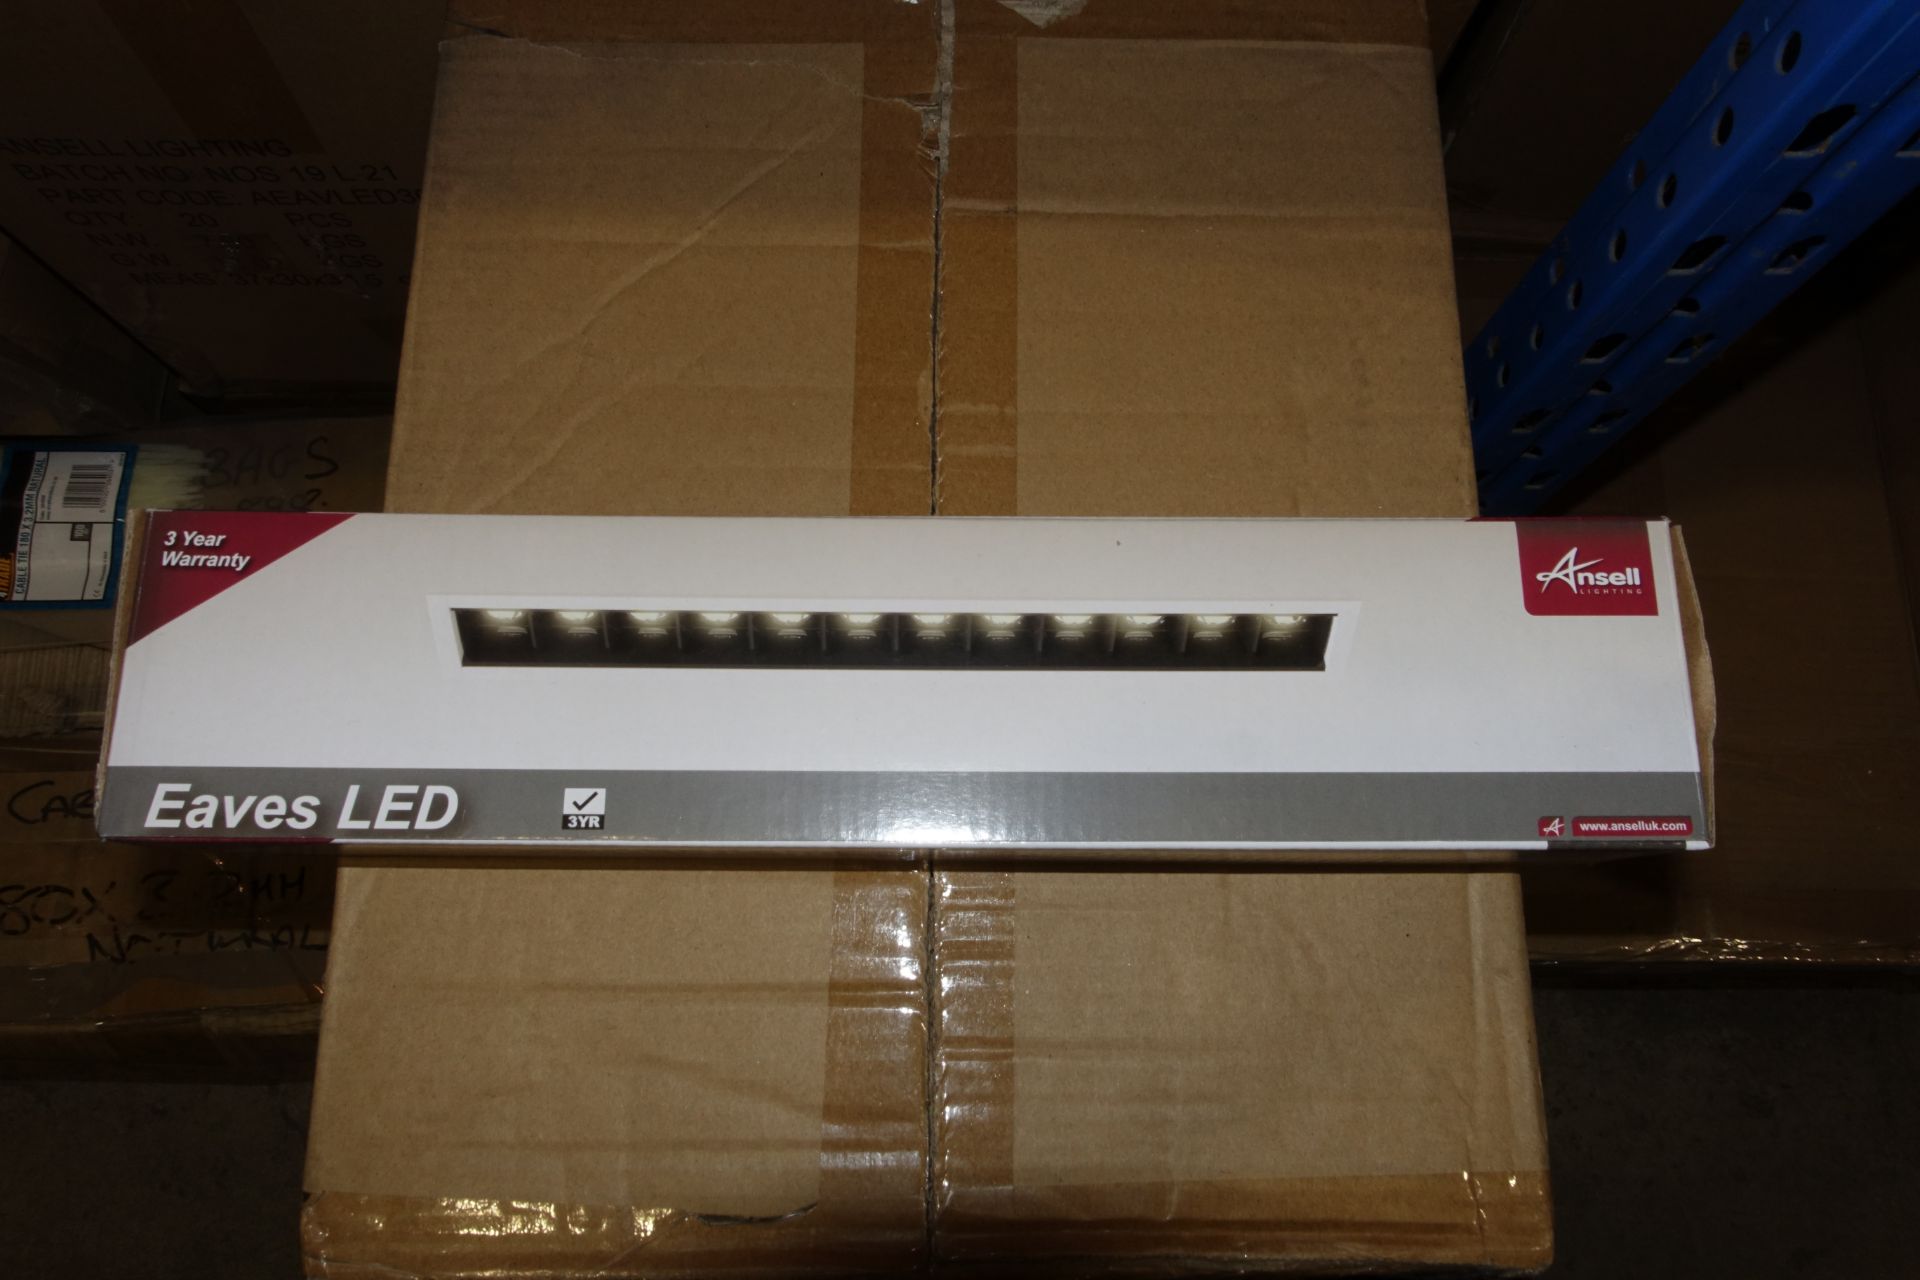 20 x ANSELL AEAVLED300/WB/WW 10W LED EAVES Recessed Linears 3000mm 3000K